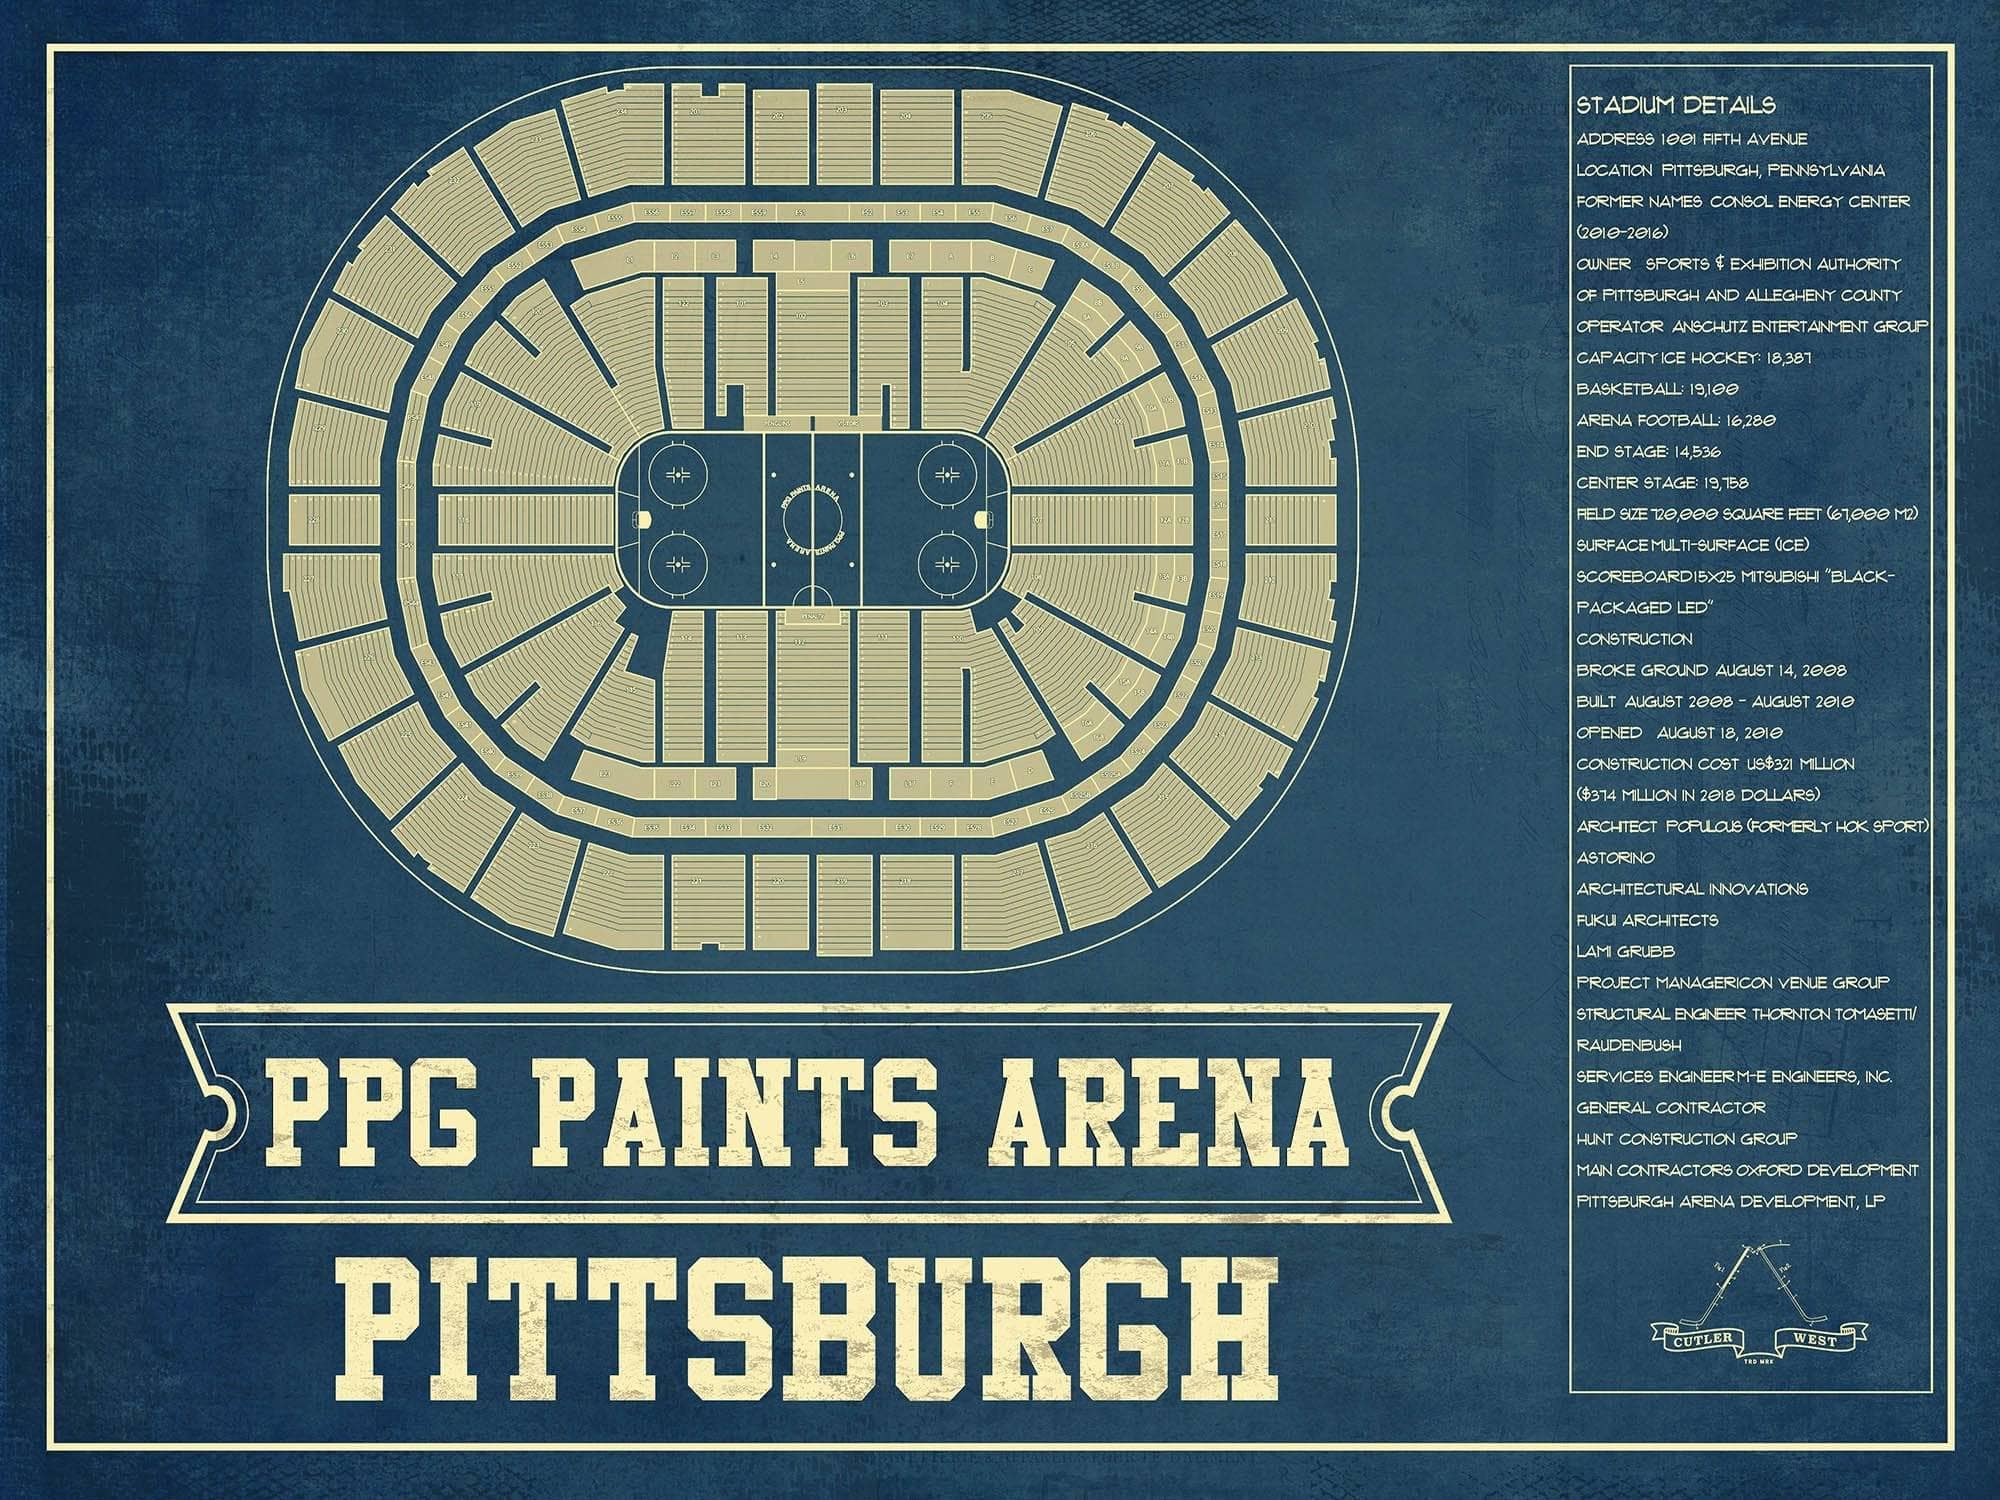 Cutler West 14" x 11" / Unframed Pittsburgh Penguins PPG Paints Arena Seating Chart - Vintage Hockey Print 659983736_80852